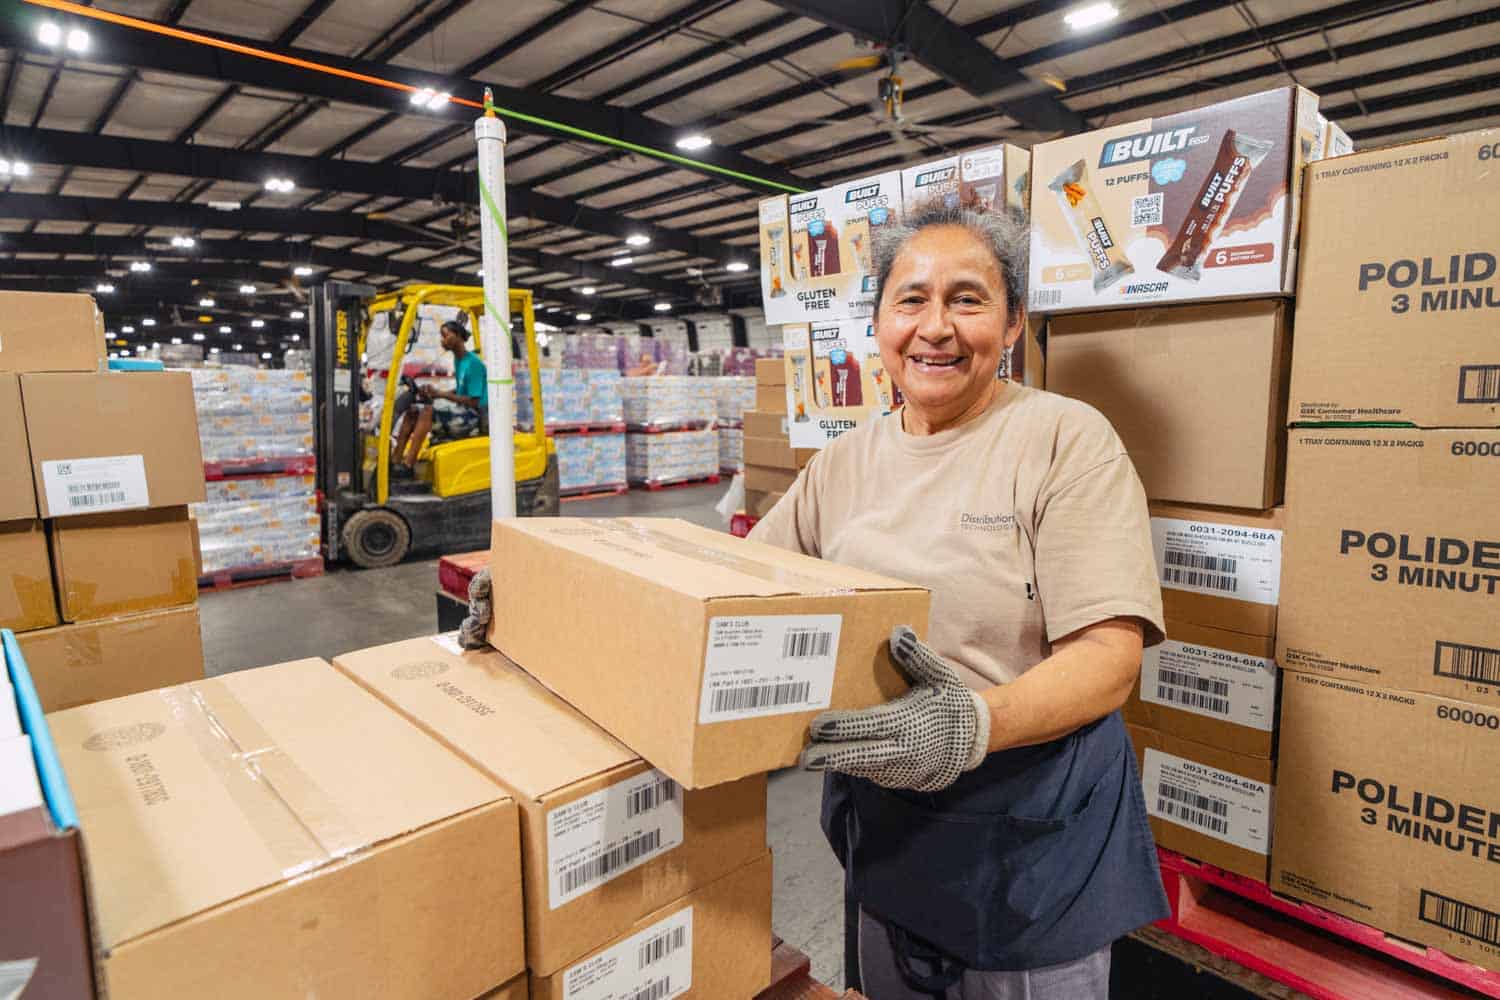 mature woman with gloves on holding a box and smiling at the camera; background is interior warehouse